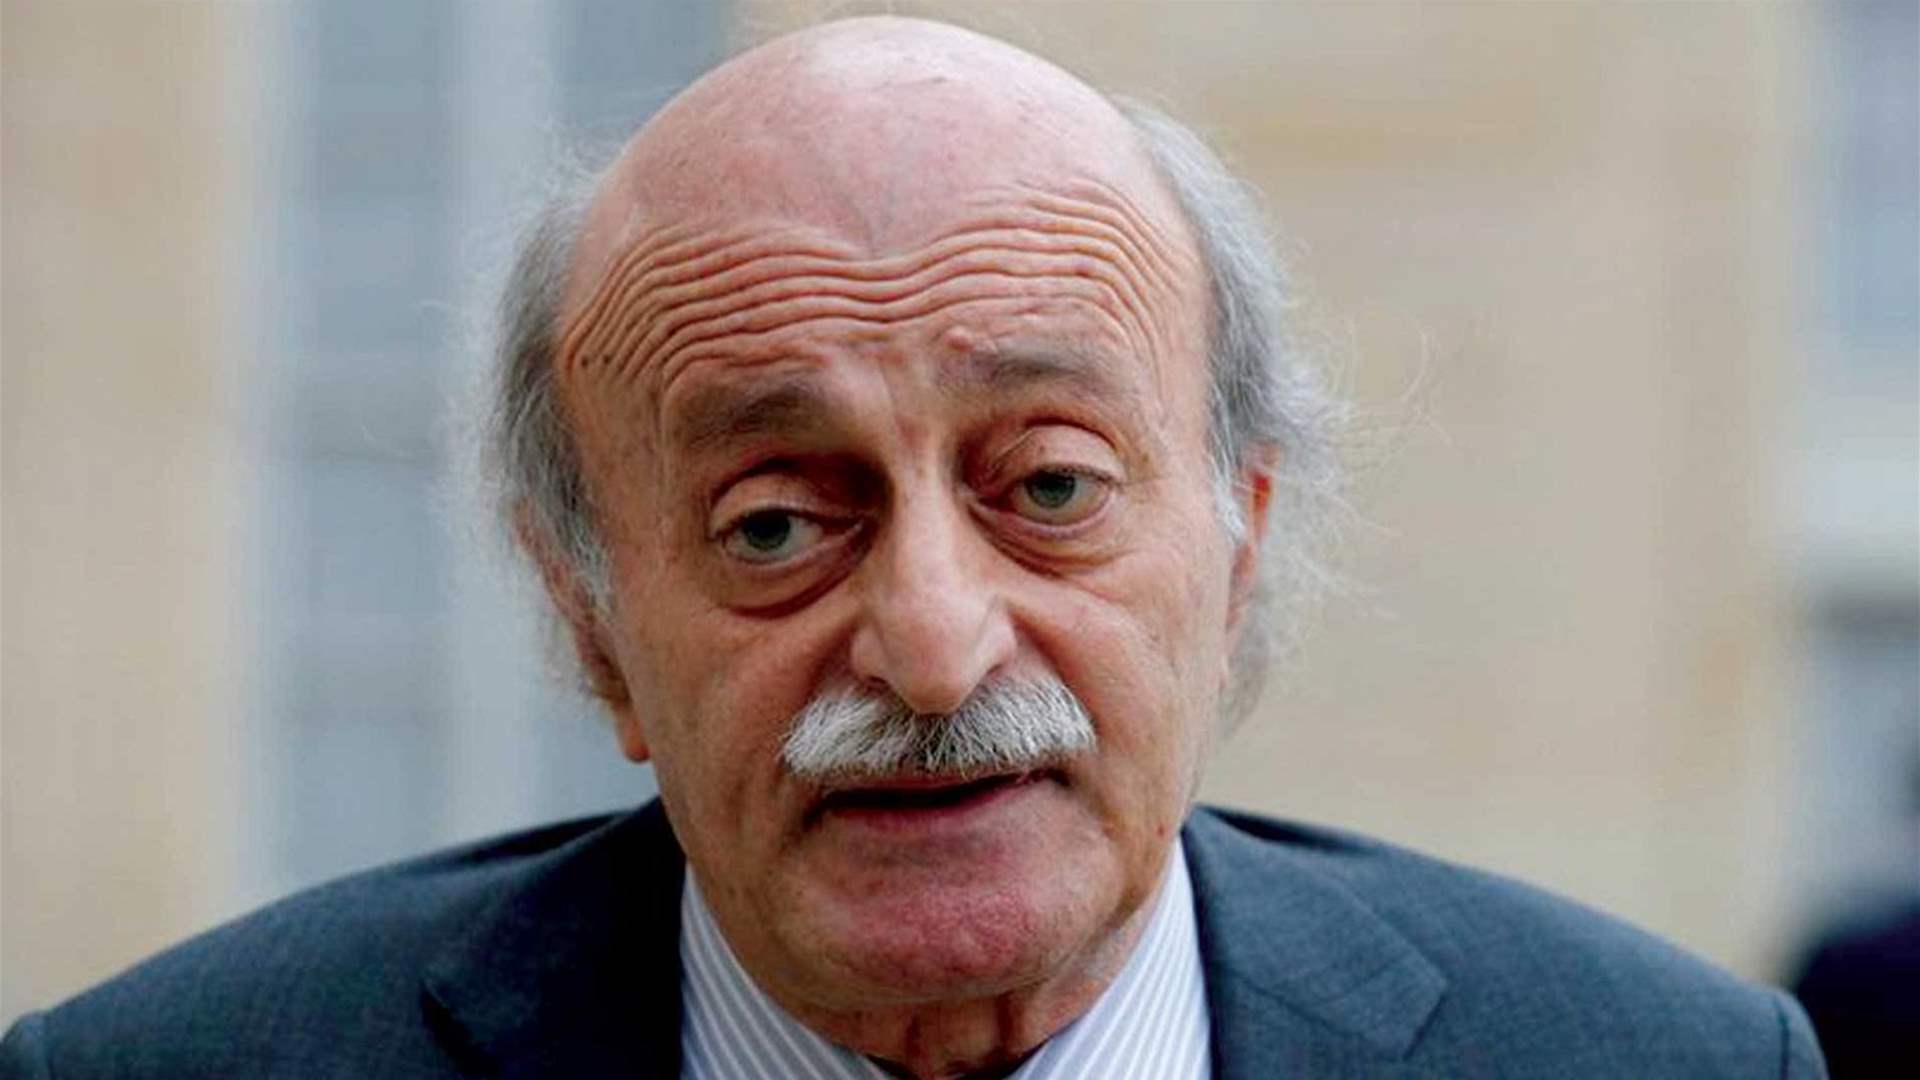 Jumblatt: Mr. Cameron gave us lessons in history about the failure of the Oslo Accords